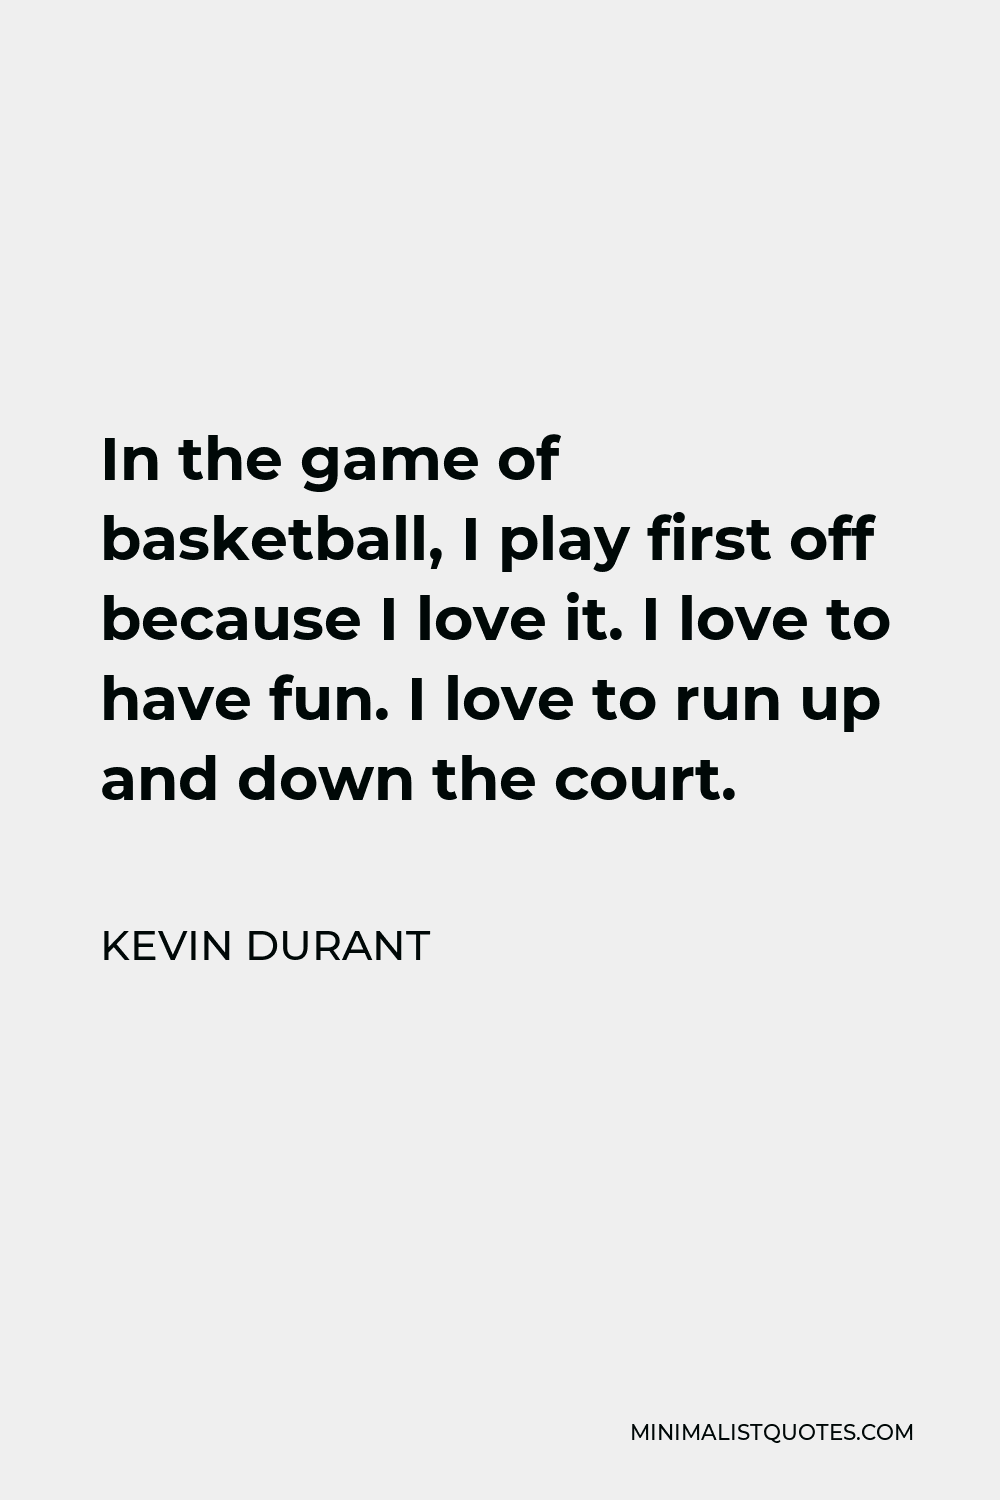 Kevin Durant Quote - In the game of basketball, I play first off because I love it. I love to have fun. I love to run up and down the court.